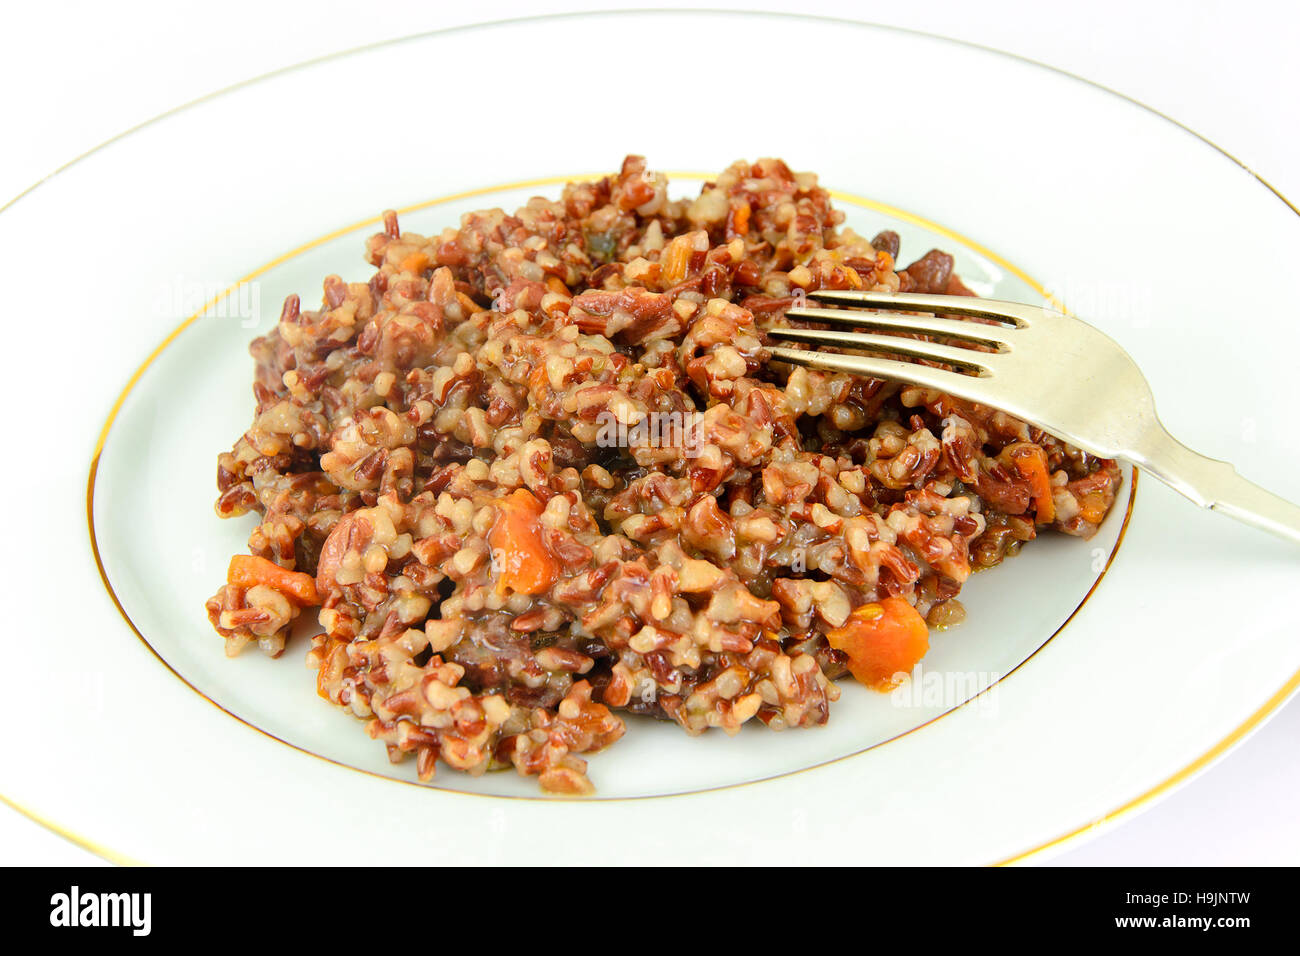 Healthy Food: Pilaf with Meat and Red Rice. Studio Photo Stock Photo